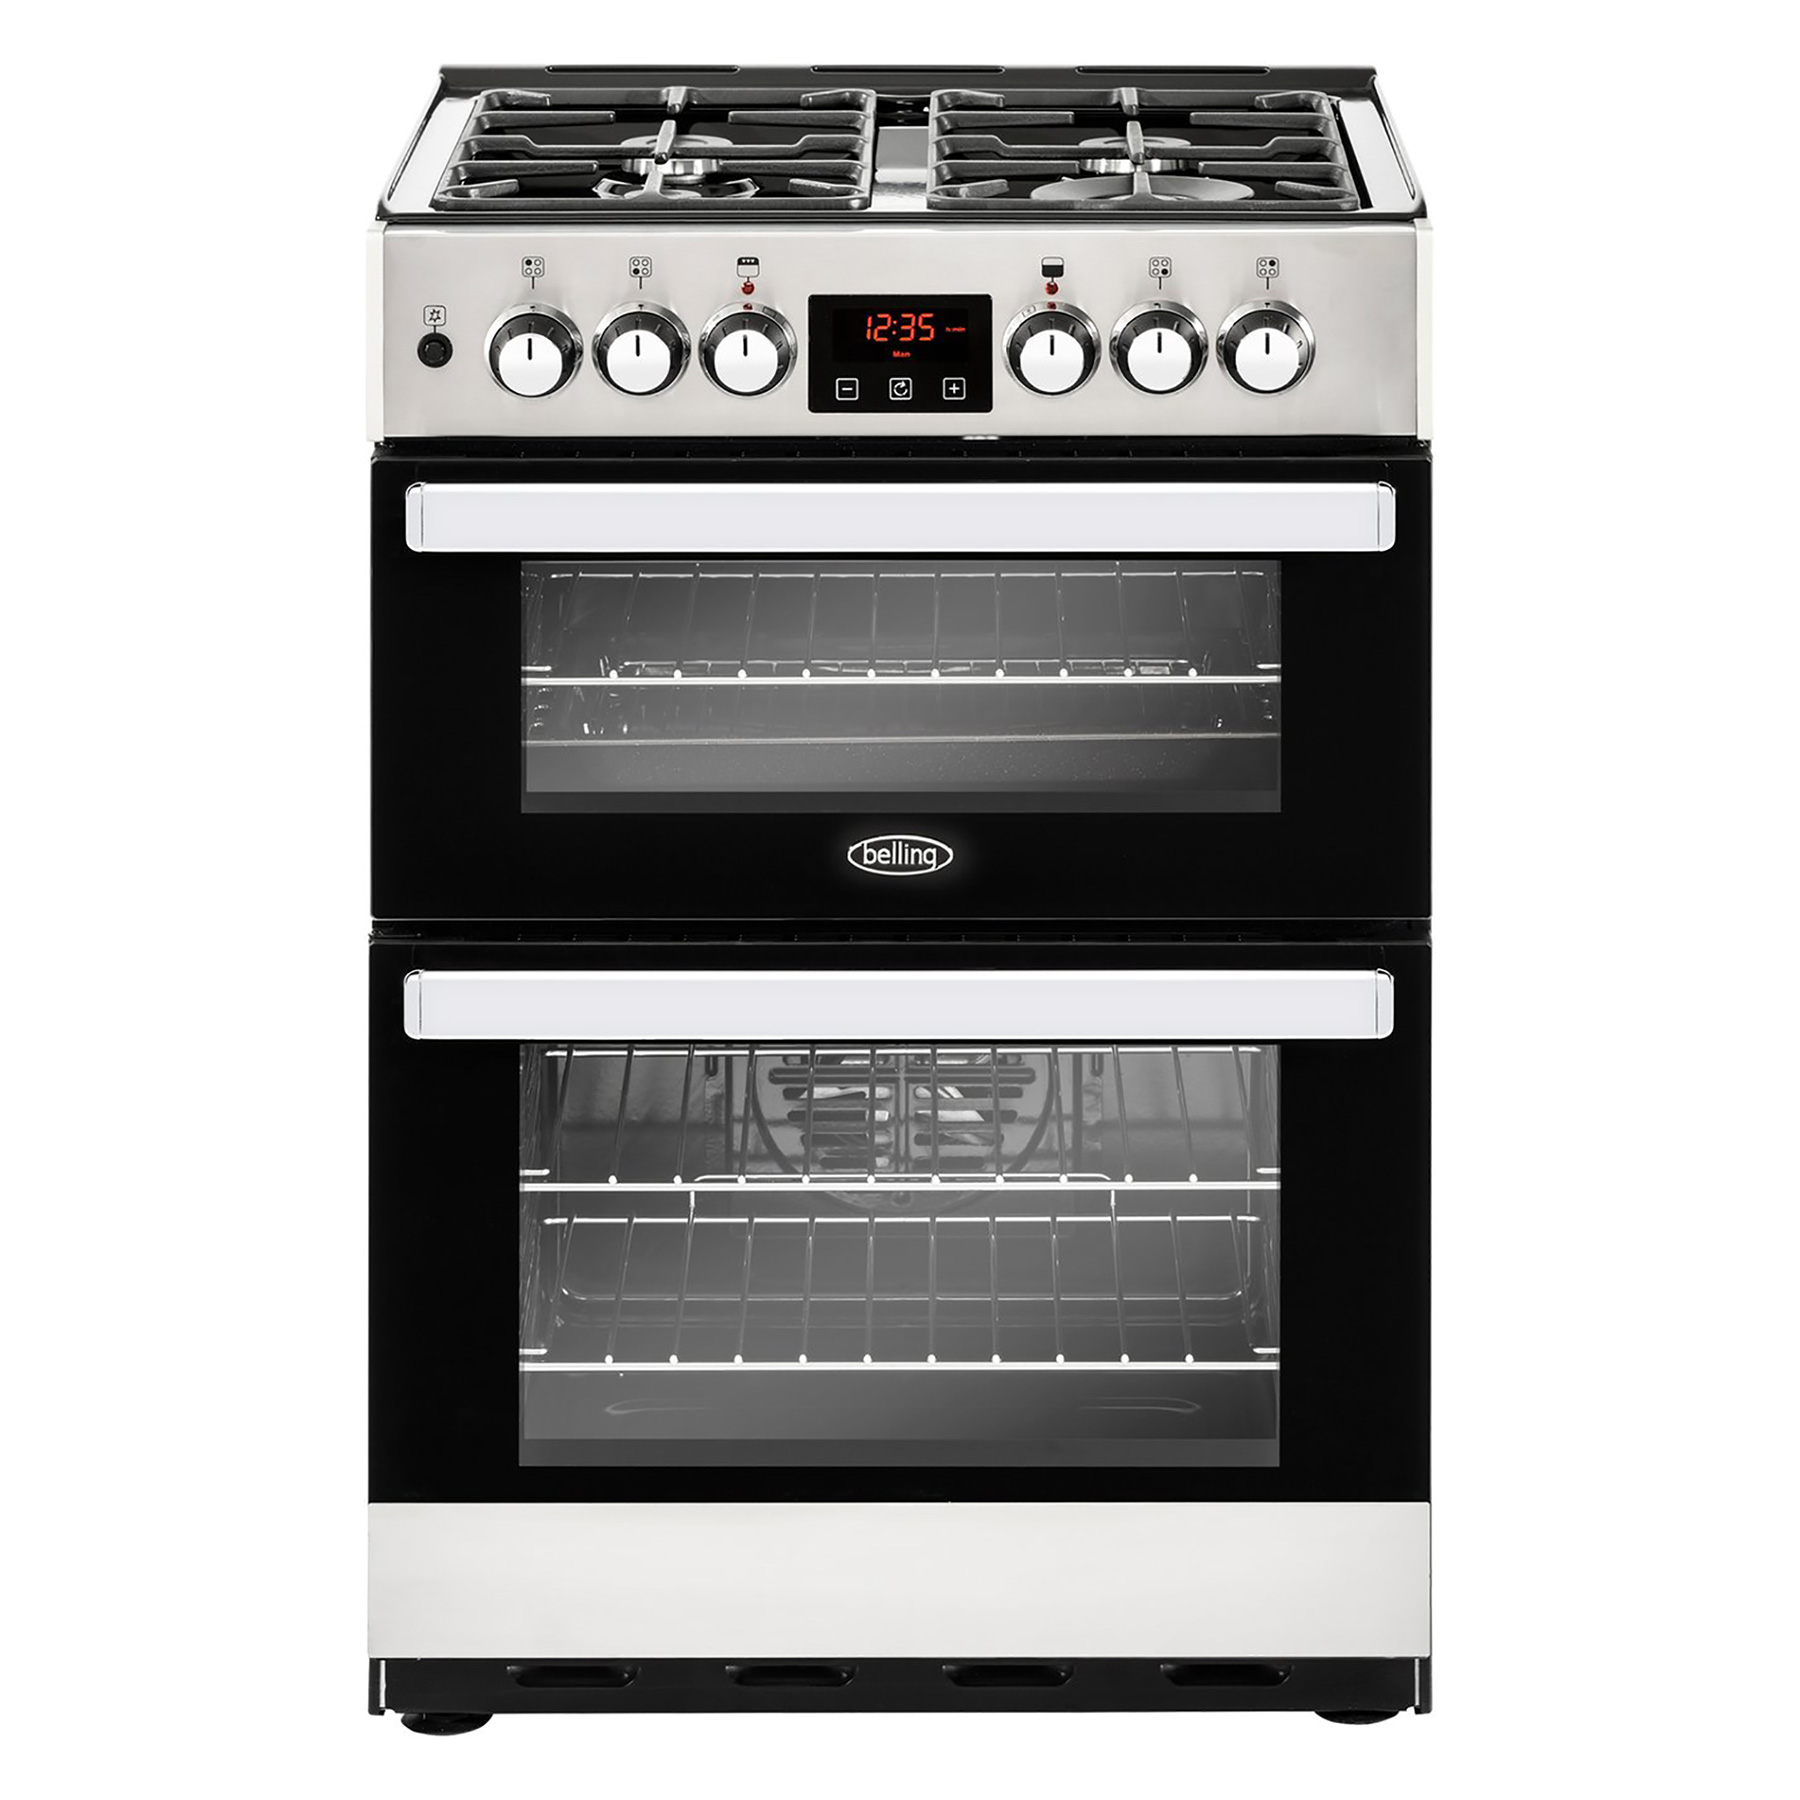 Image of Belling 444410822 60cm Cookcentre 60DF D Oven Dual Fuel Cooker in St S